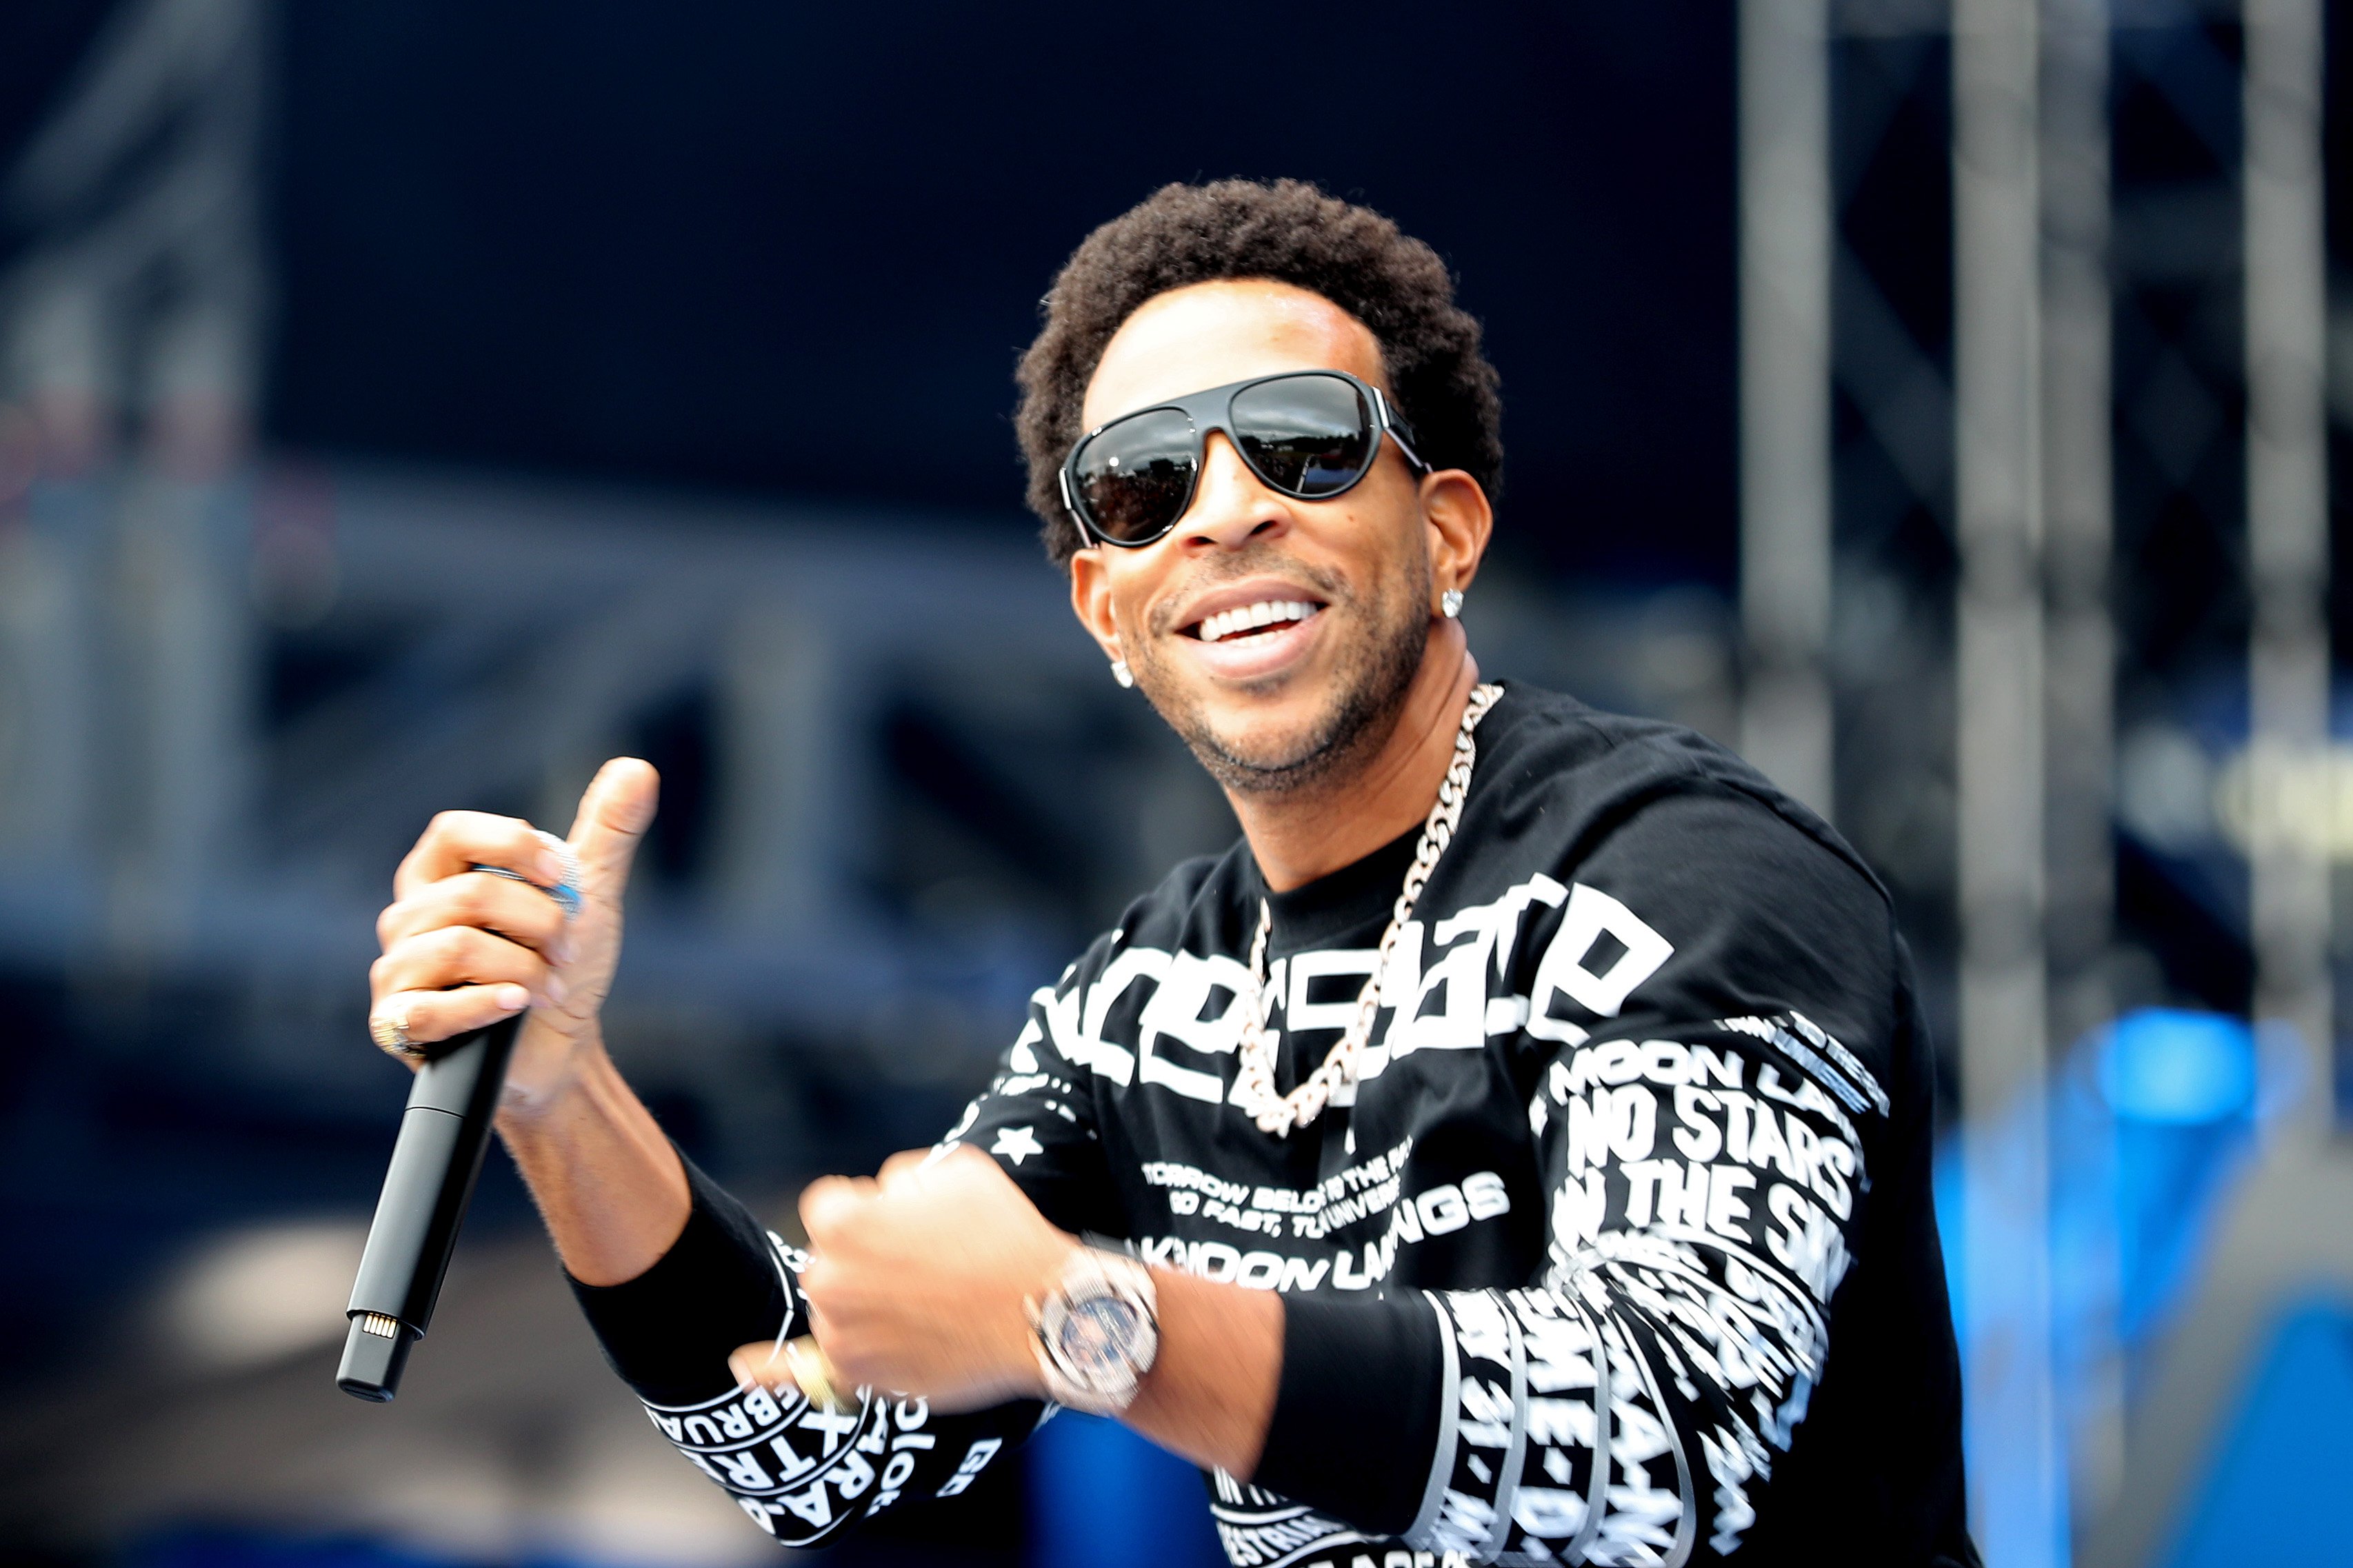  Ludacris performs onstage at Universal Pictures Presents The Road To F9 Concert and Trailer Drop on January 31, 2020. | Photo: Getty Images